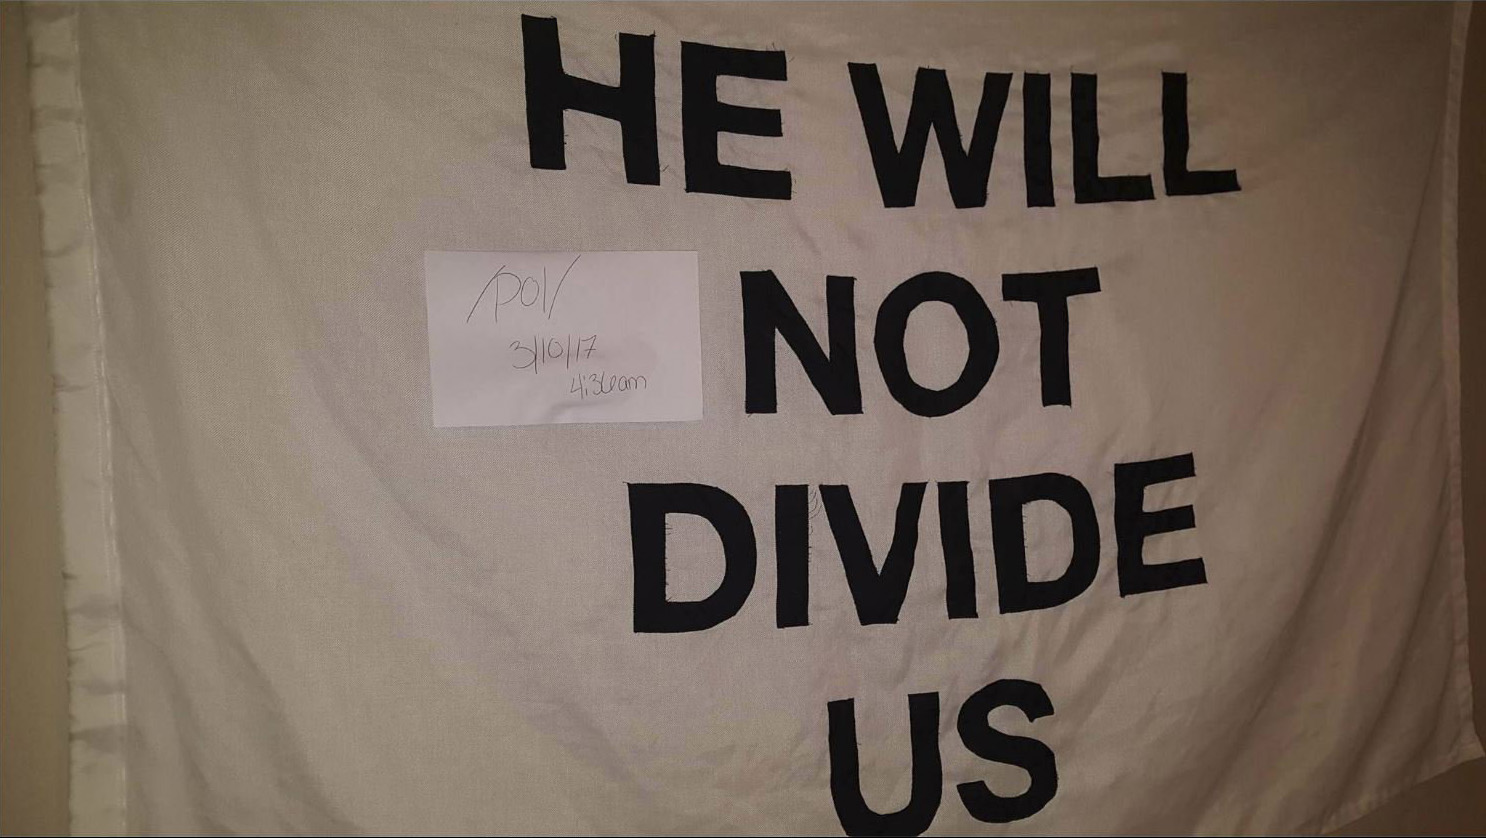 Vide me. Шайа ЛАБАФ флаг. He will not Divide us. Will he. Come and take it.